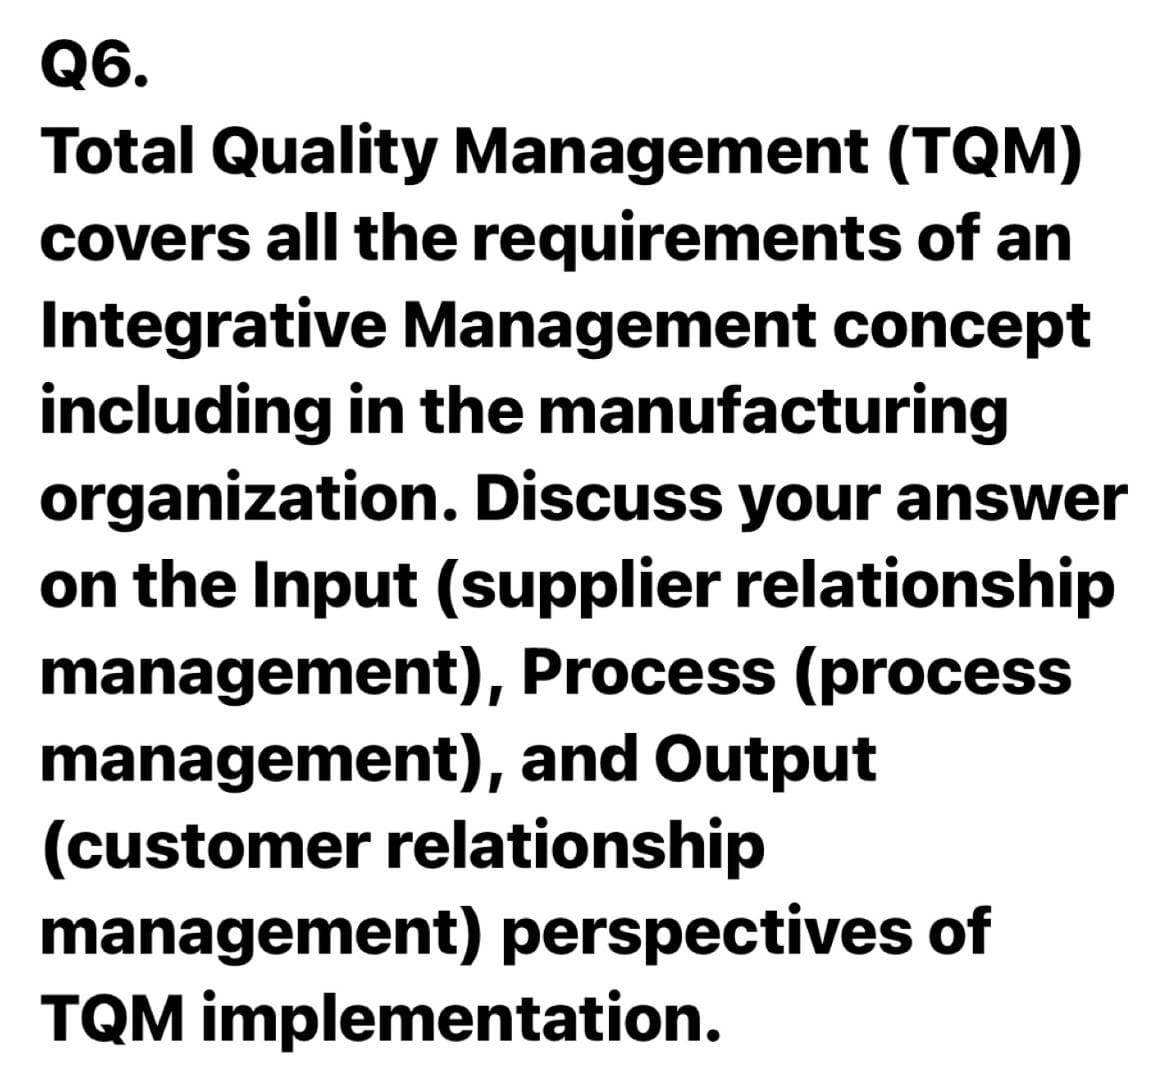 Q6.
Total Quality Management (TQM)
covers all the requirements of an
Integrative Management concept
including in the manufacturing
organization. Discuss your answer
on the Input (supplier relationship
management), Process (process
management), and Output
(customer relationship
management) perspectives of
TQM implementation.
